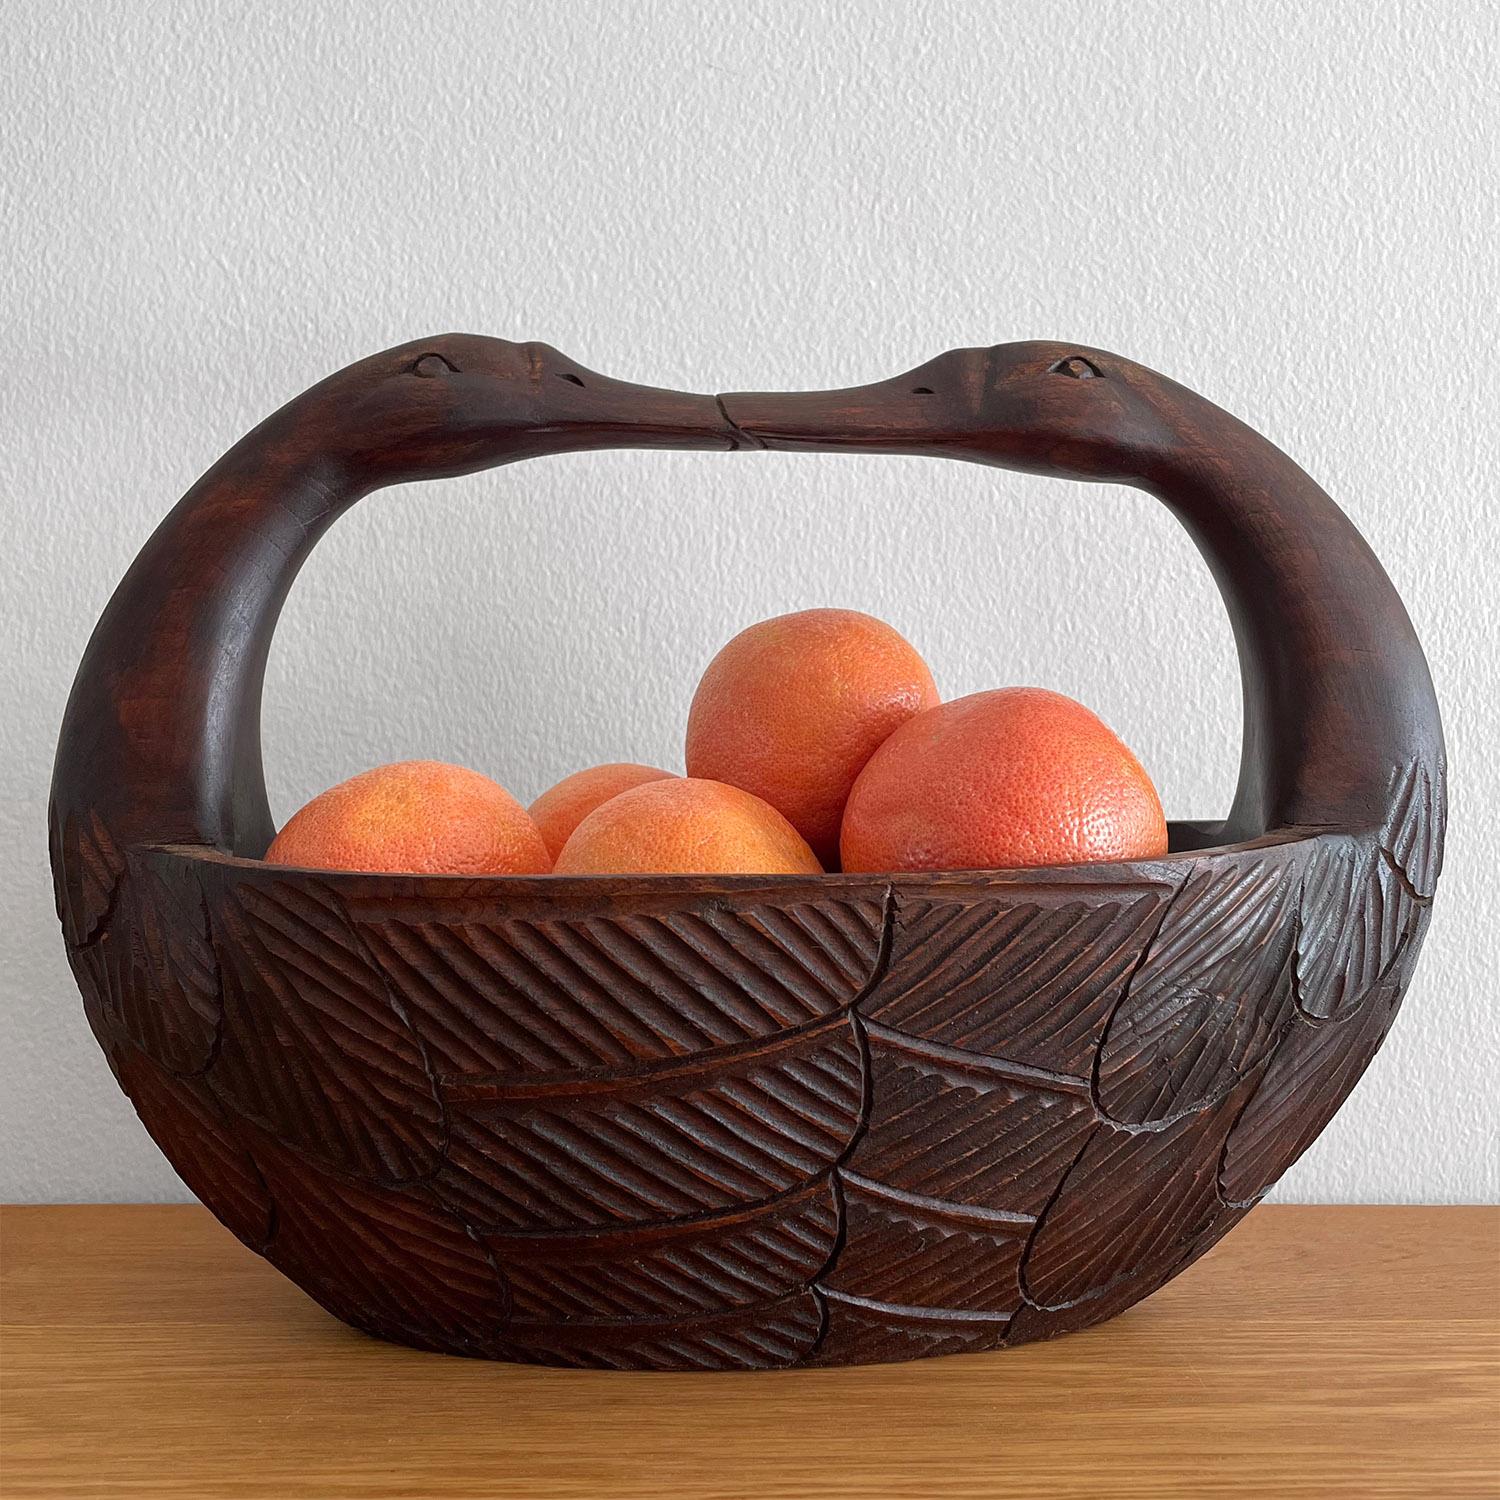 Folk art carved wood swan bowl
This is a stunning statement piece that will be a wonderful addition to any surface
Handcrafted artisanal piece
Carved from a single piece of wood
Wonderful wood grain detail and intricate feather etchings
Minor